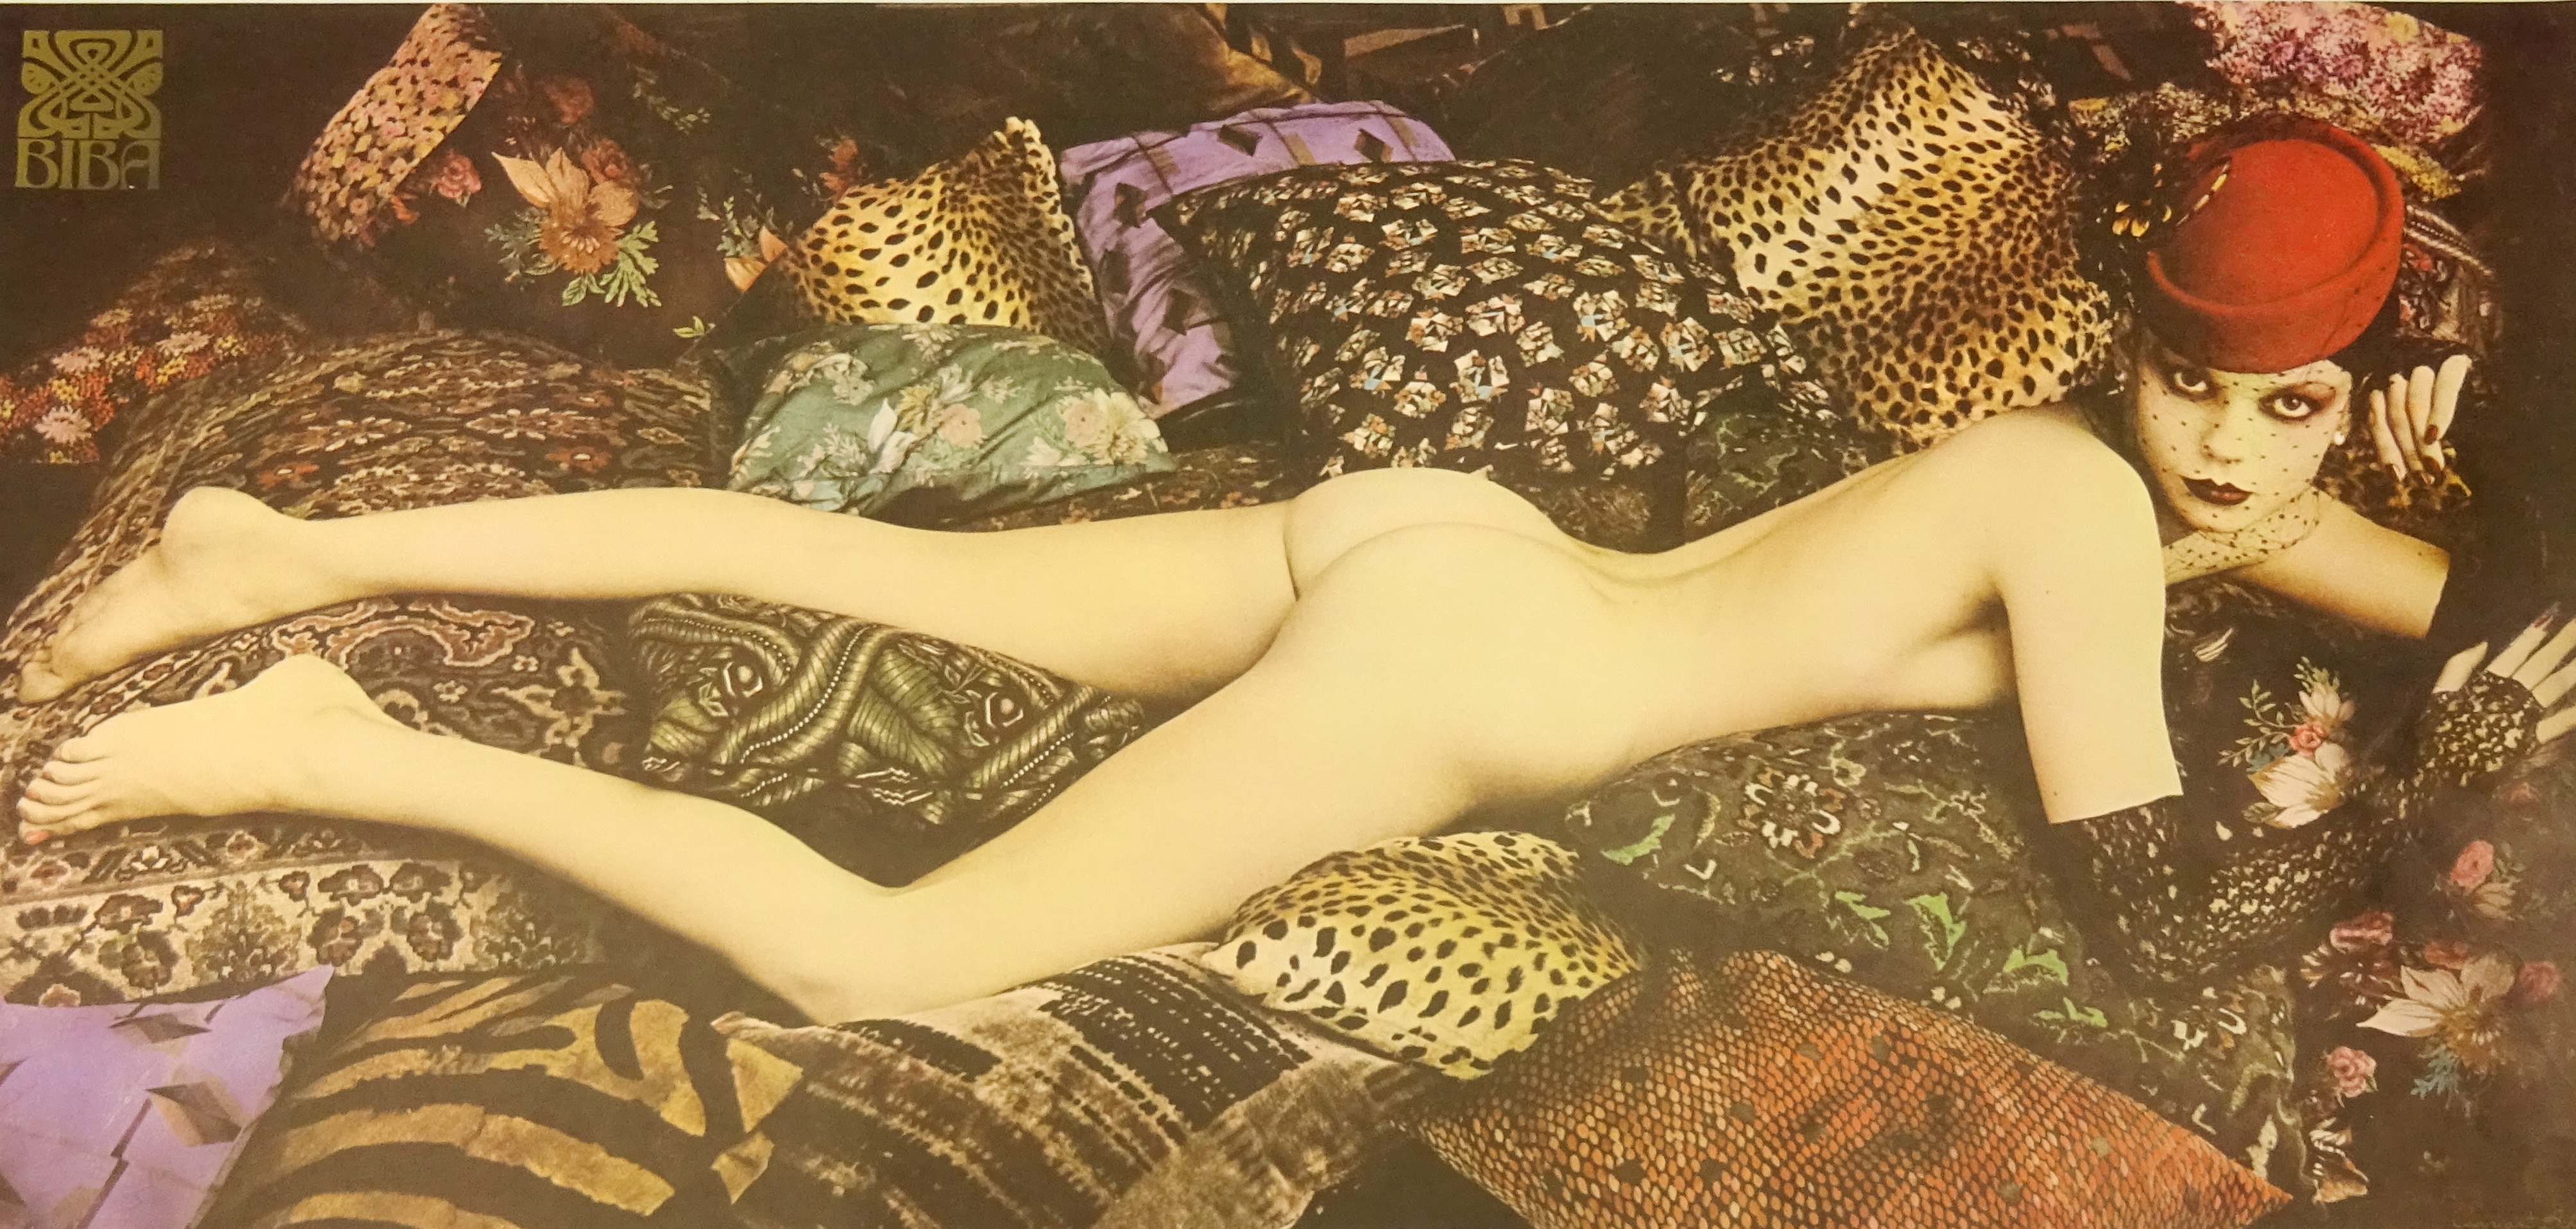 1974 Biba poster photographed by James Wedge for Biba Stores,